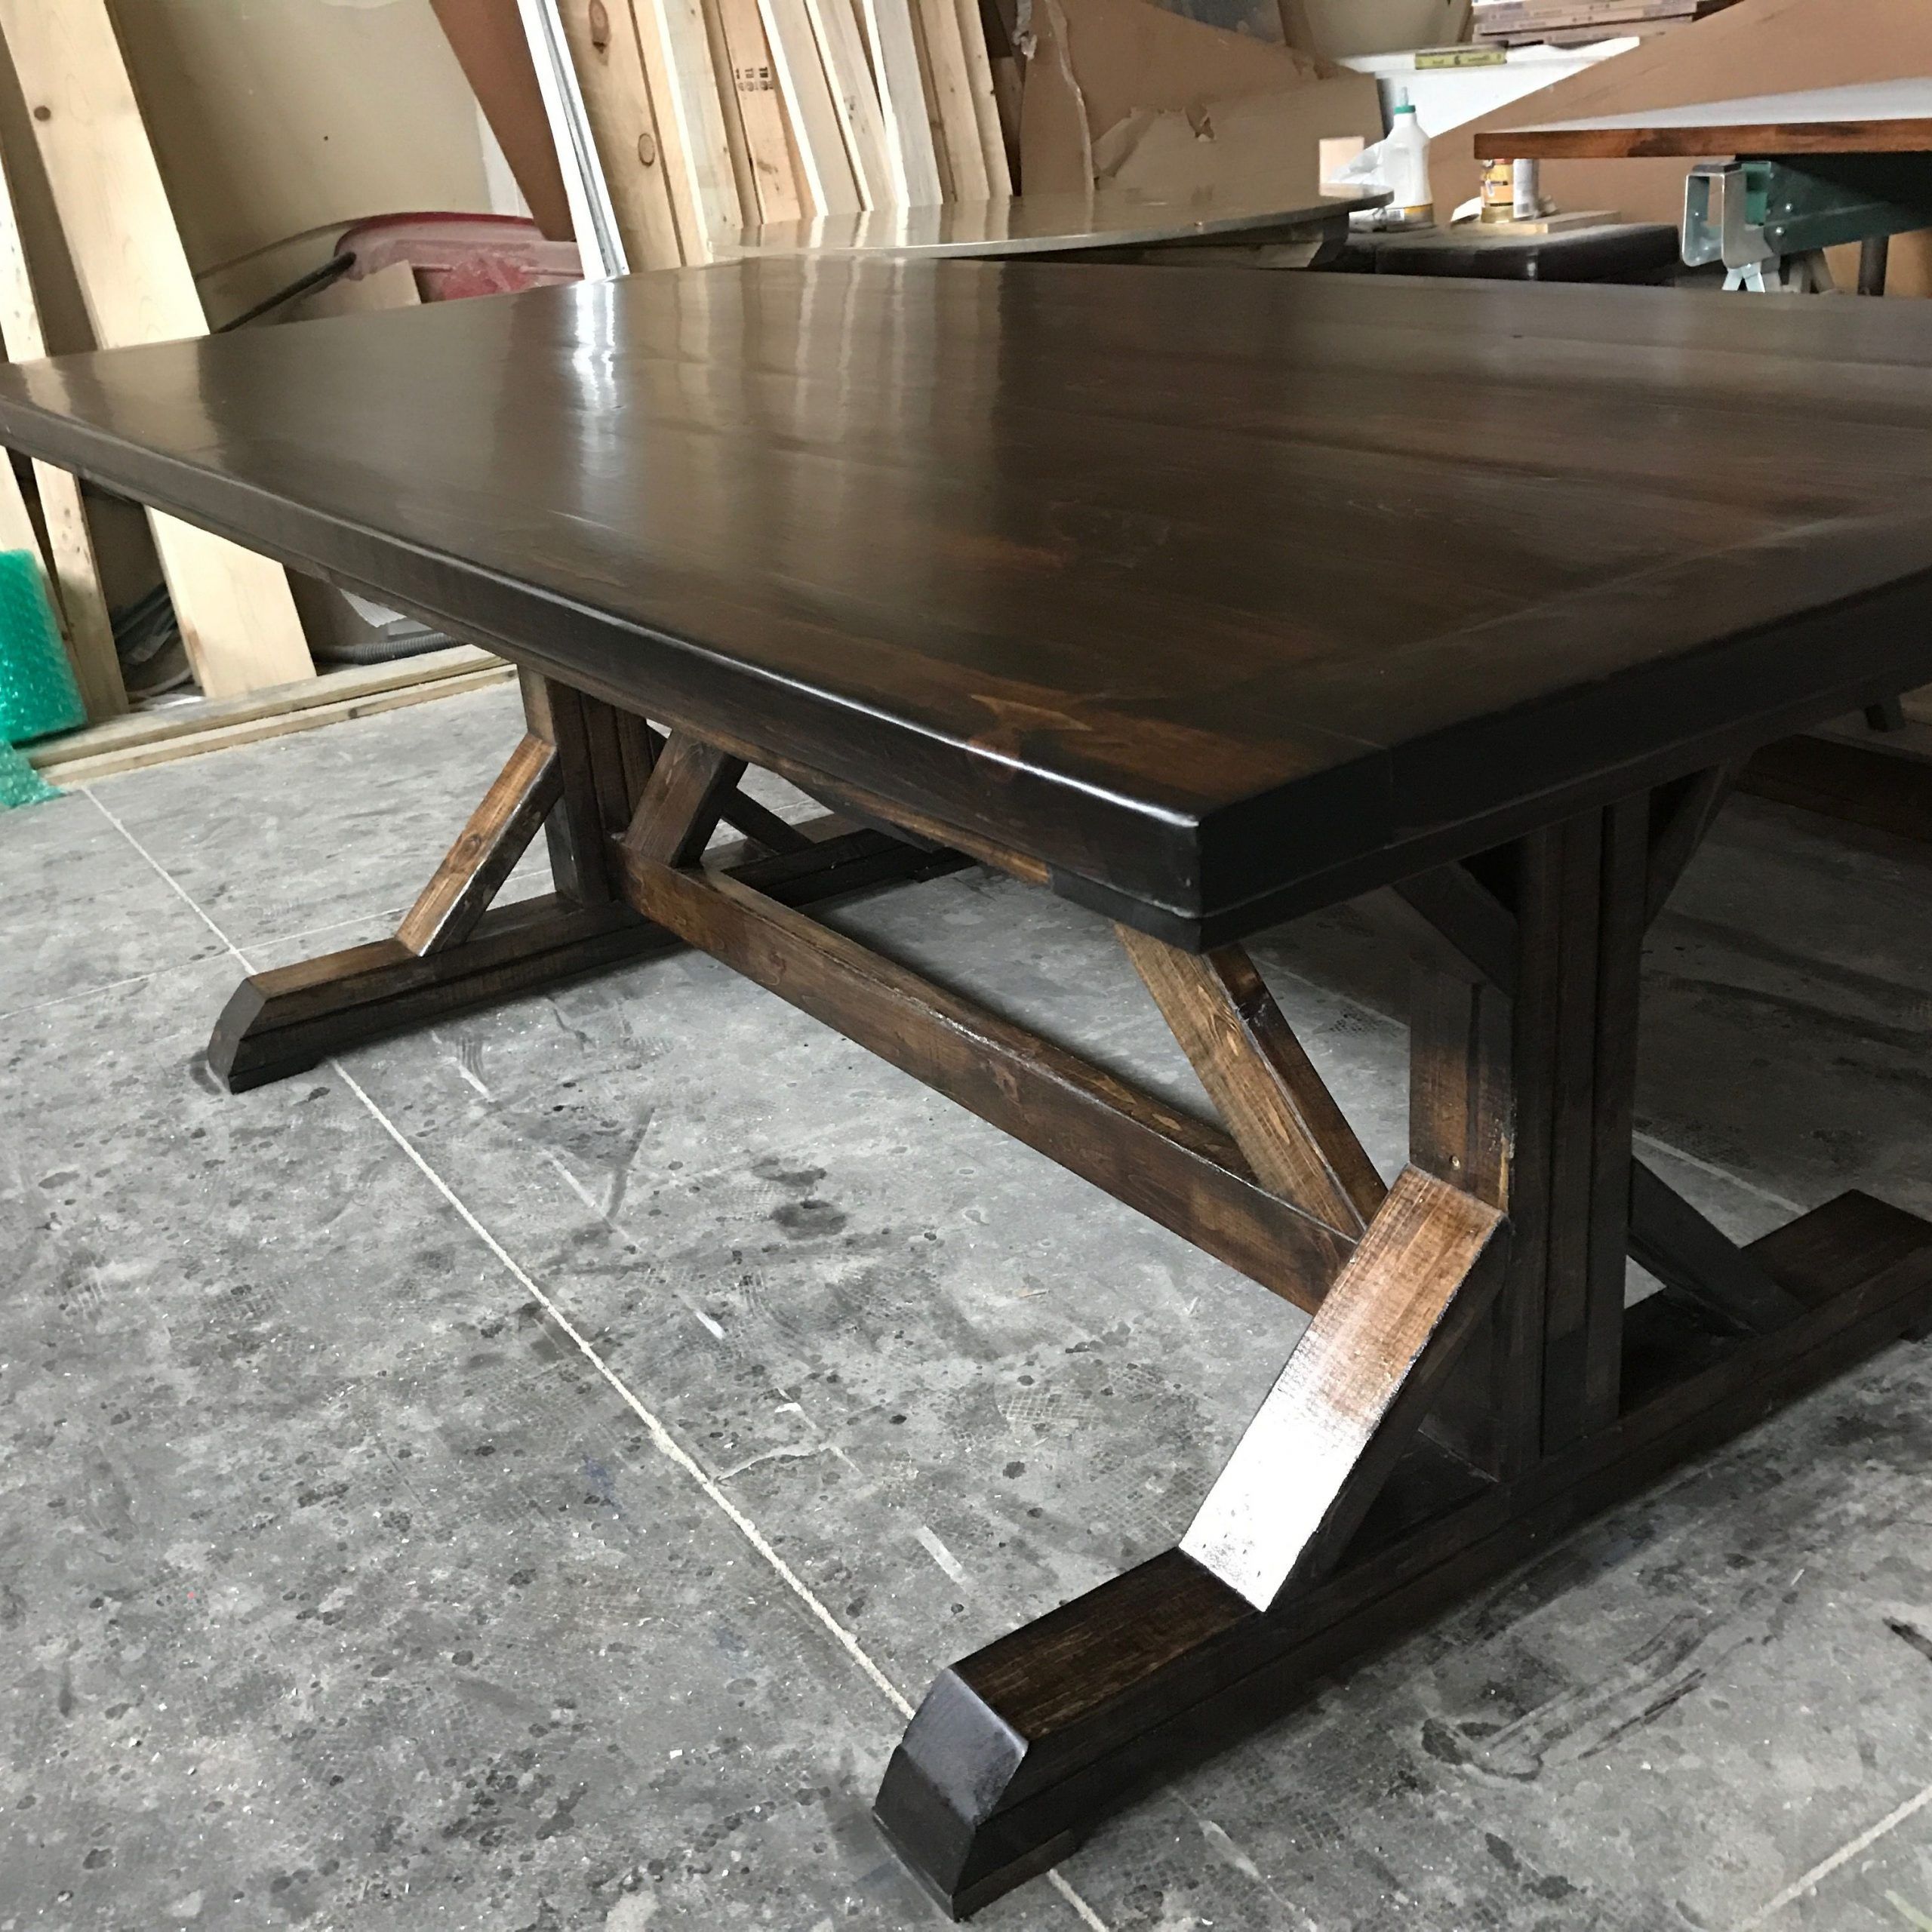 Thick White Marble Slab Dining Tables With Weathered Grey Finish For Latest Farm Trestle Table Done In Dark Browns With A Satin Finish (View 7 of 30)